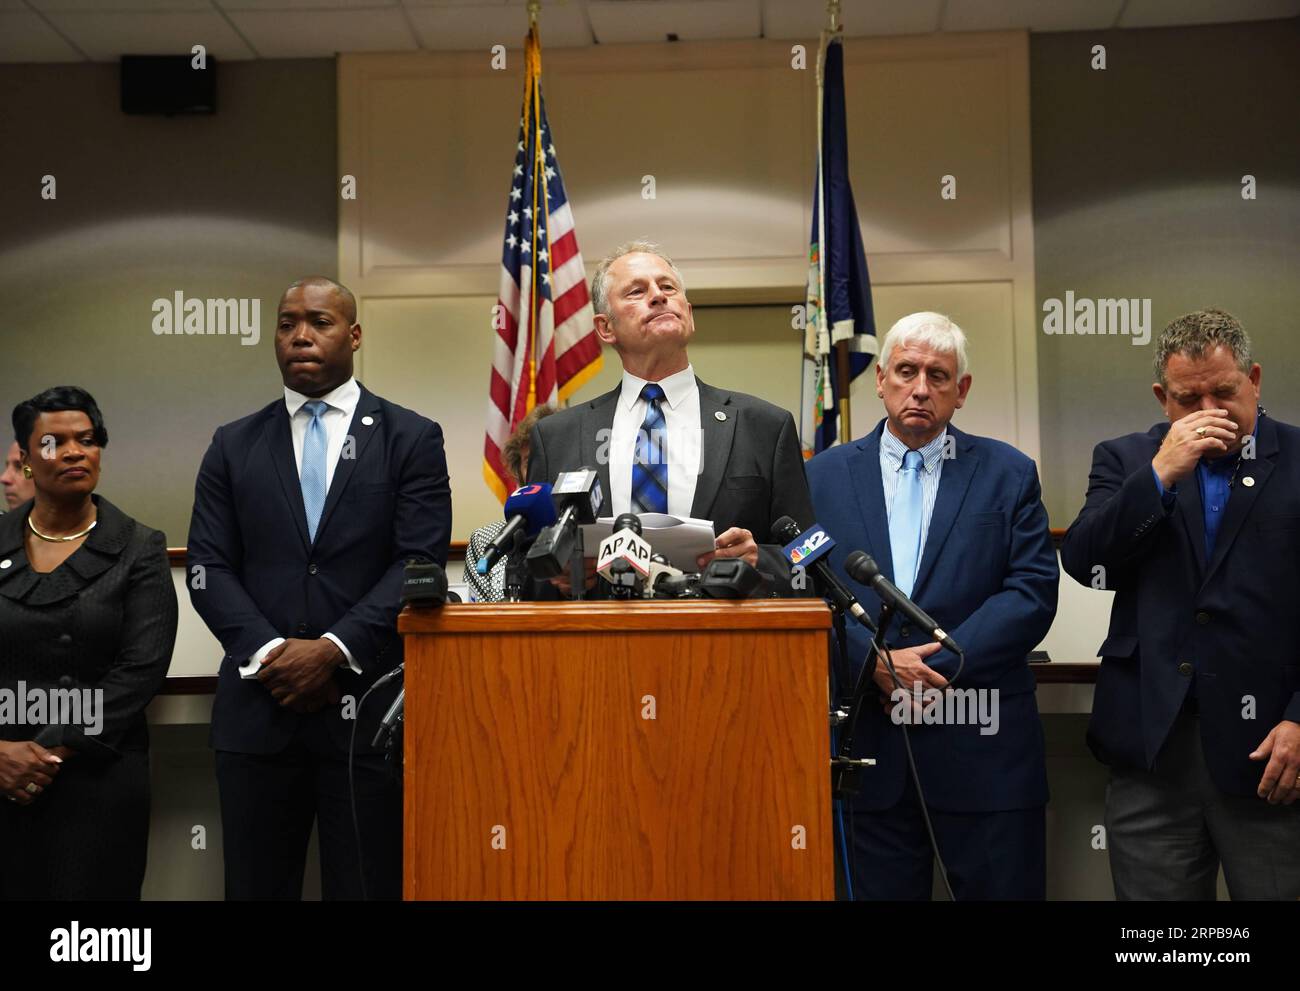 News Bilder des Tages (190601) -- VIRGINIA BEACH (U.S.), June 1, 2019 -- Virginia Beach City Manager Dave Hansen (C) speaks during a press conference in Virginia Beach, Virginia, the United States, on June 1, 2019. The shooter who killed 12 people in a mass shooting in Virginia Beach, in the eastern U.S. state of Virginia, on Friday, has been identified as DeWayne Craddock, a 15-year city employee, local police said on Saturday. ) U.S.-VIRGINIA-MASS SHOOTING LiuxJie PUBLICATIONxNOTxINxCHN Stock Photo